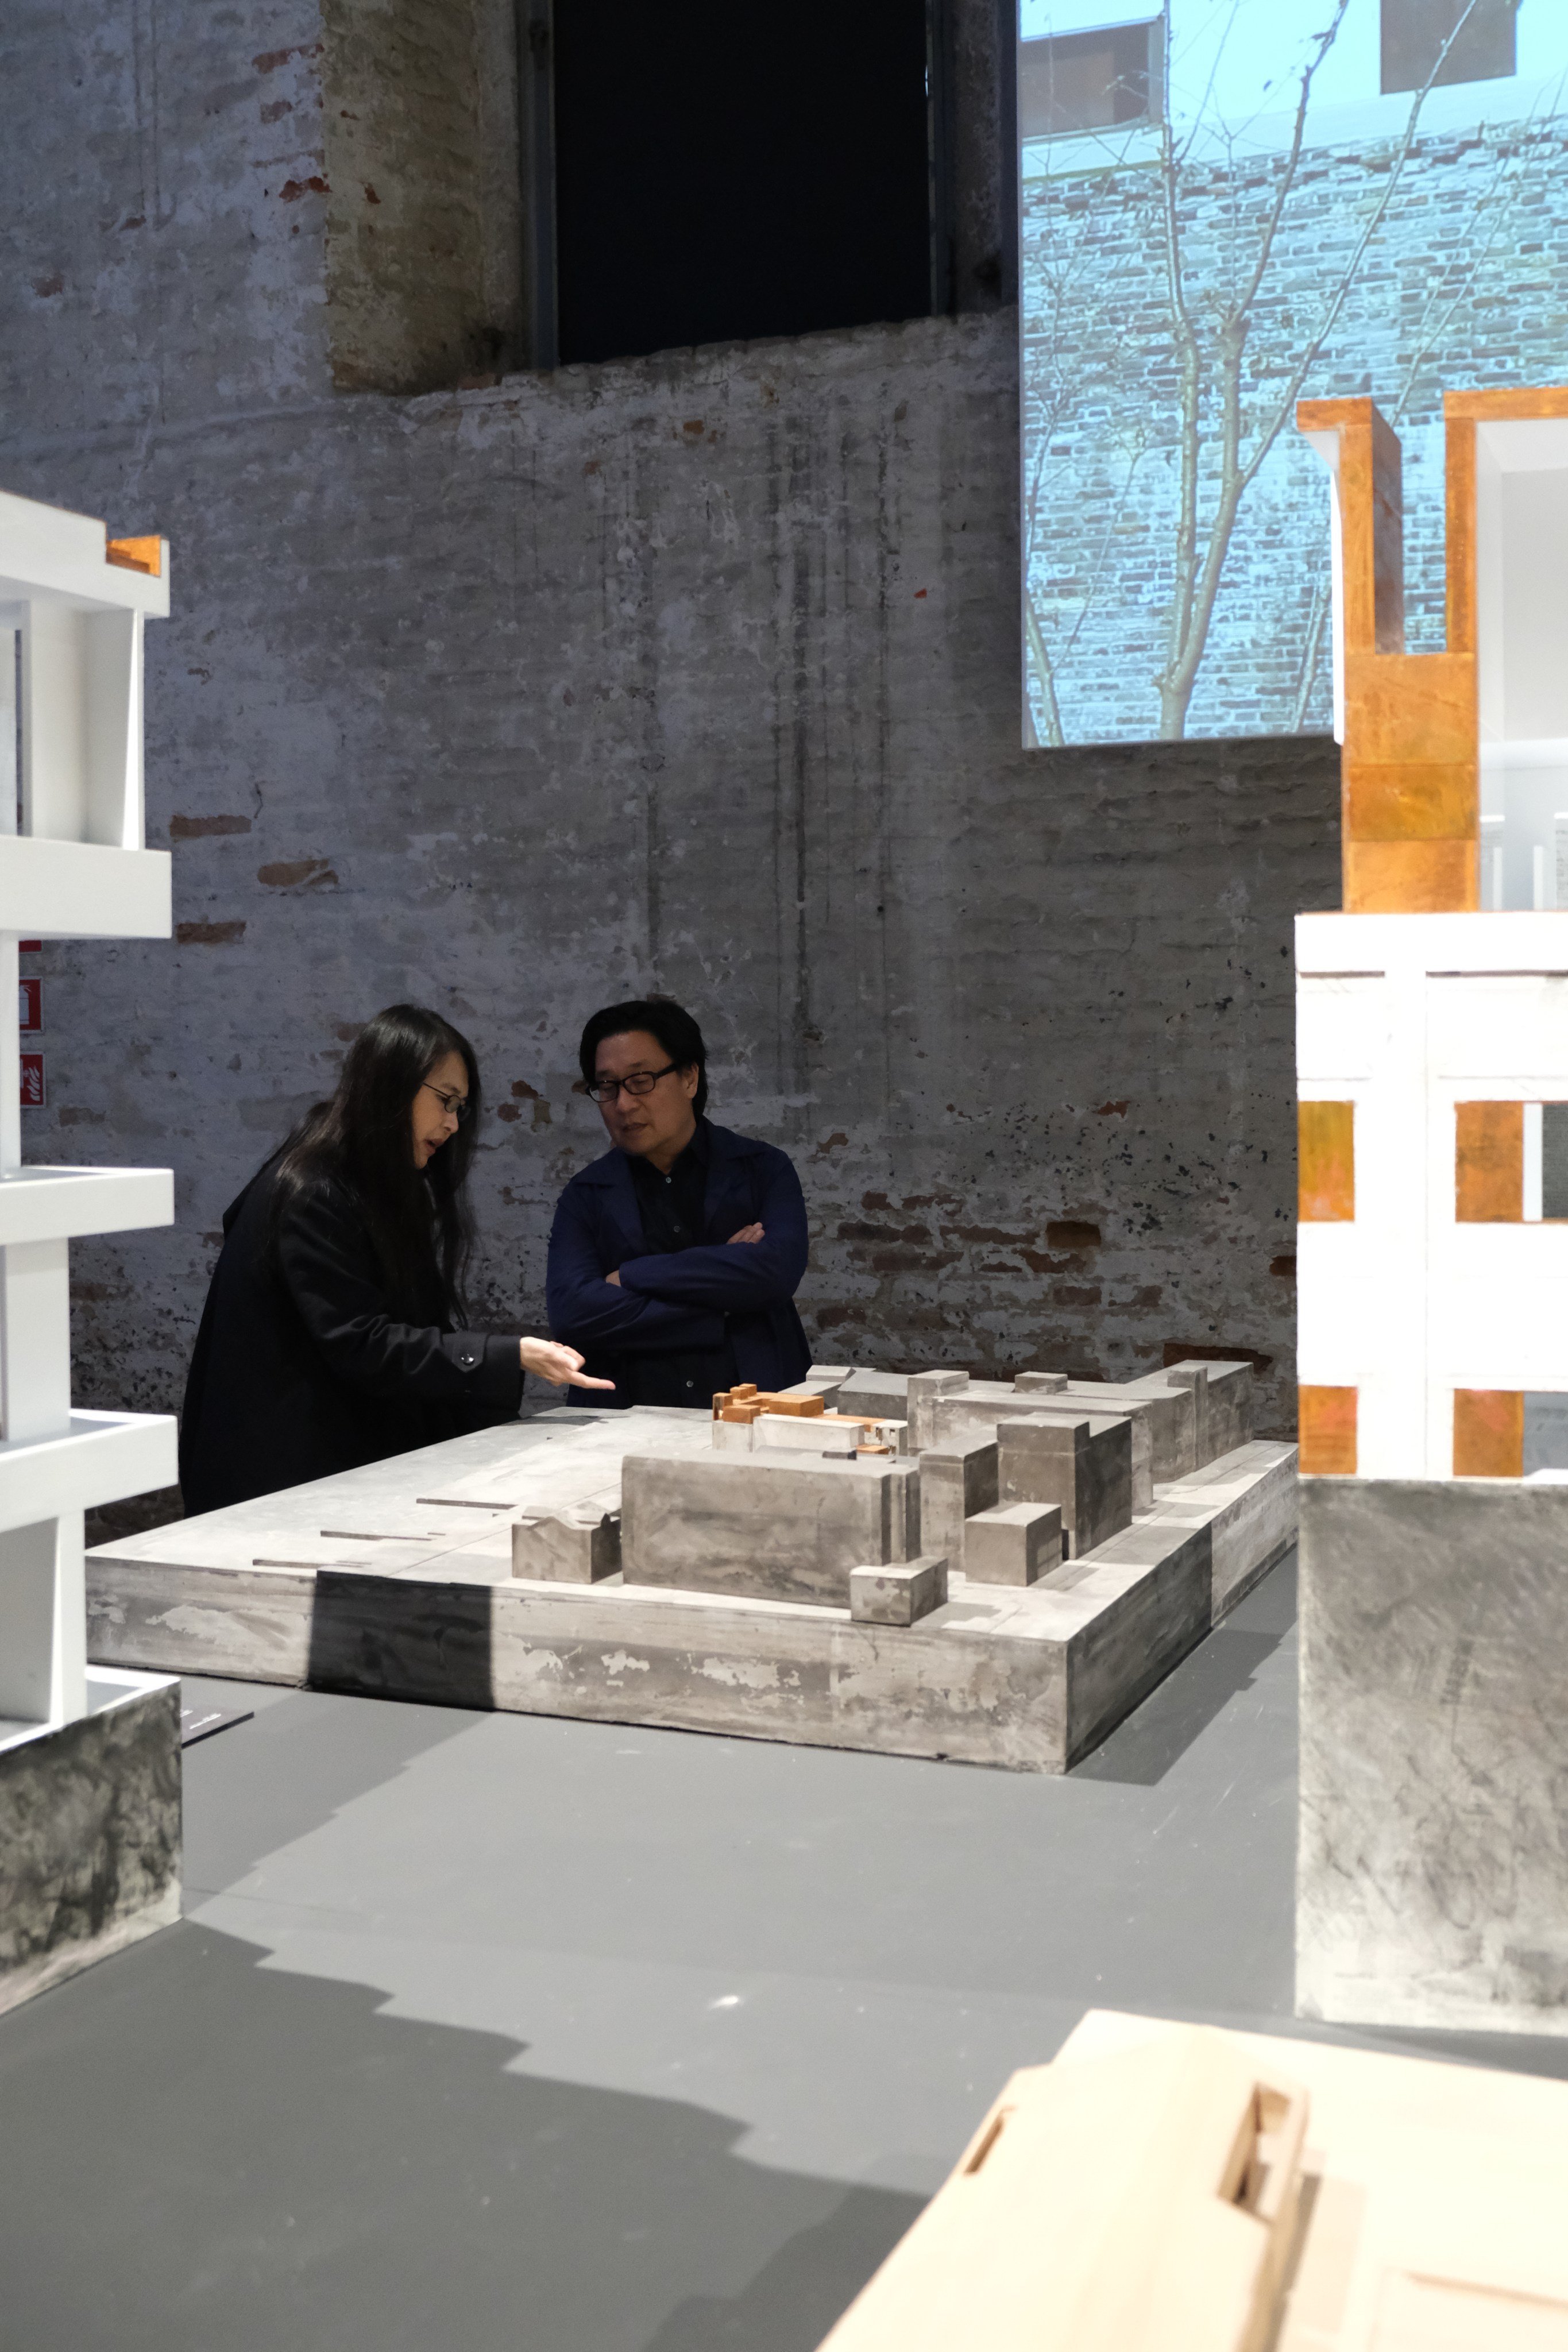 Lyndon Neri (right) and Rosanna Hu of Chinese architecture firm Neri&Hu at the 18th Venice Biennale of Architecture with their installation “Liminality”, which highlights their adaptive reuse philosophy. Photo: Jeremiah Neri